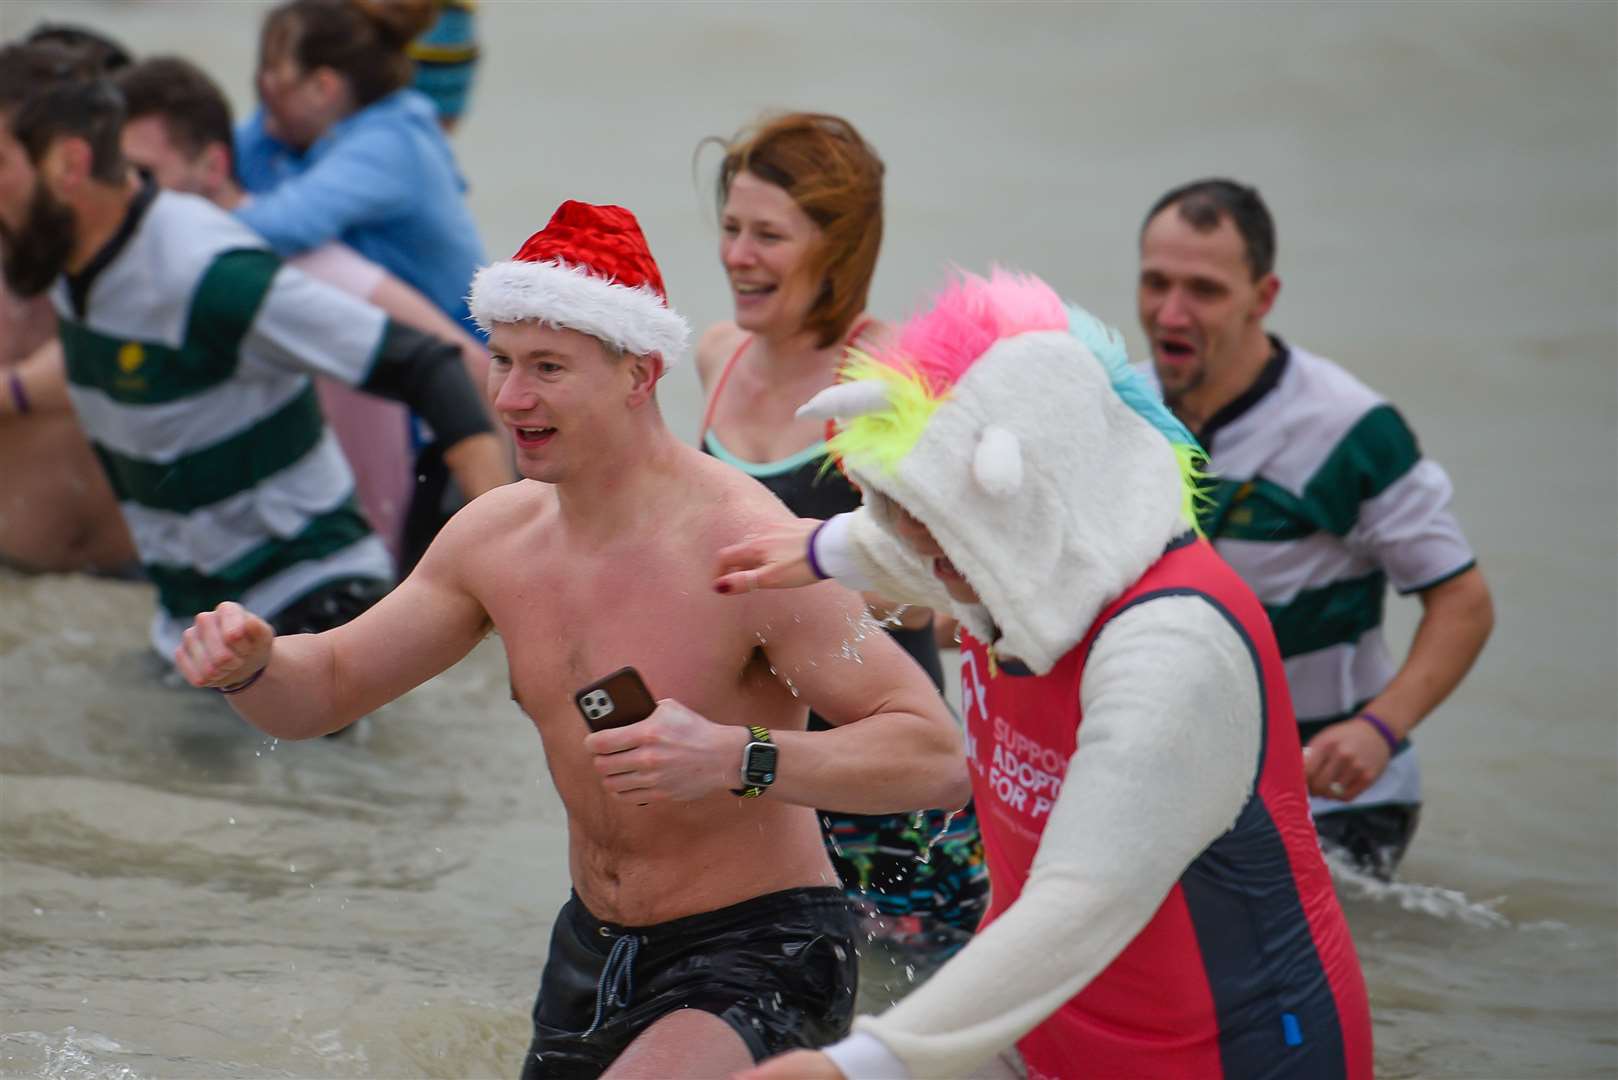 The Boxing Day Dip in Deal is another event in the Christmas period calendar